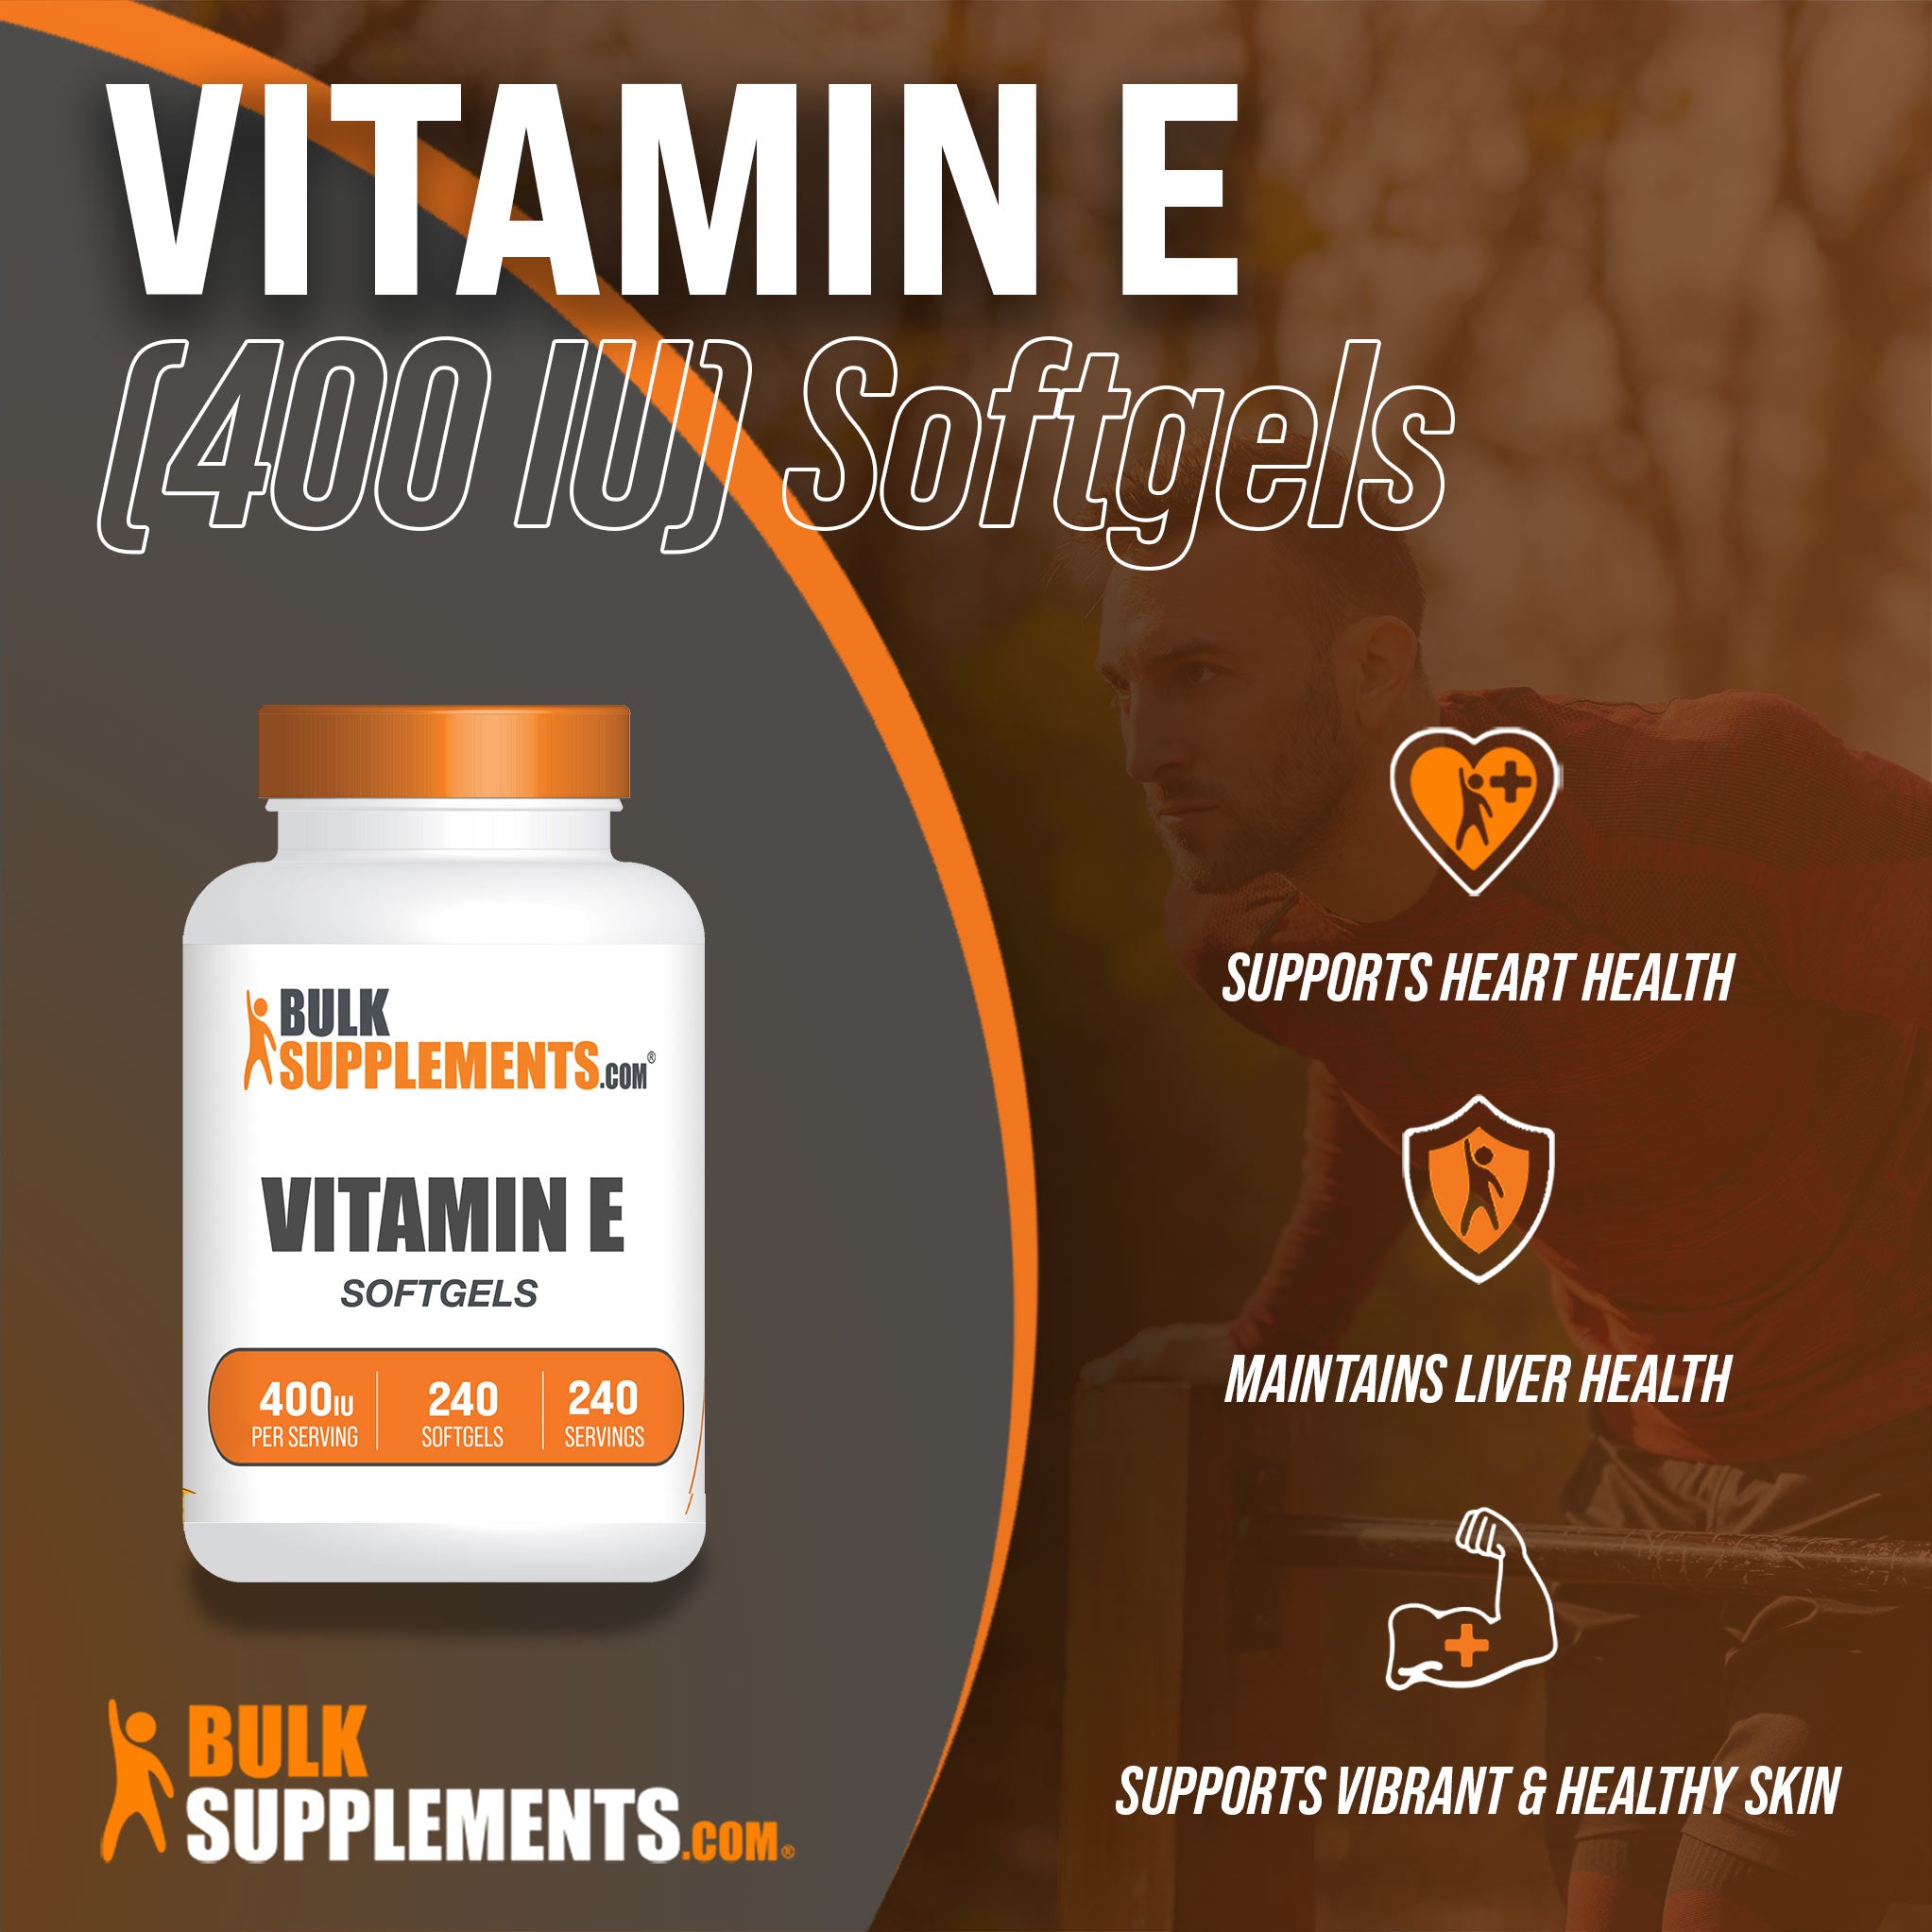 Benefits of Vitamin E Softgels: supports heart health, maintains liver health, supports vibrant and healthy skin